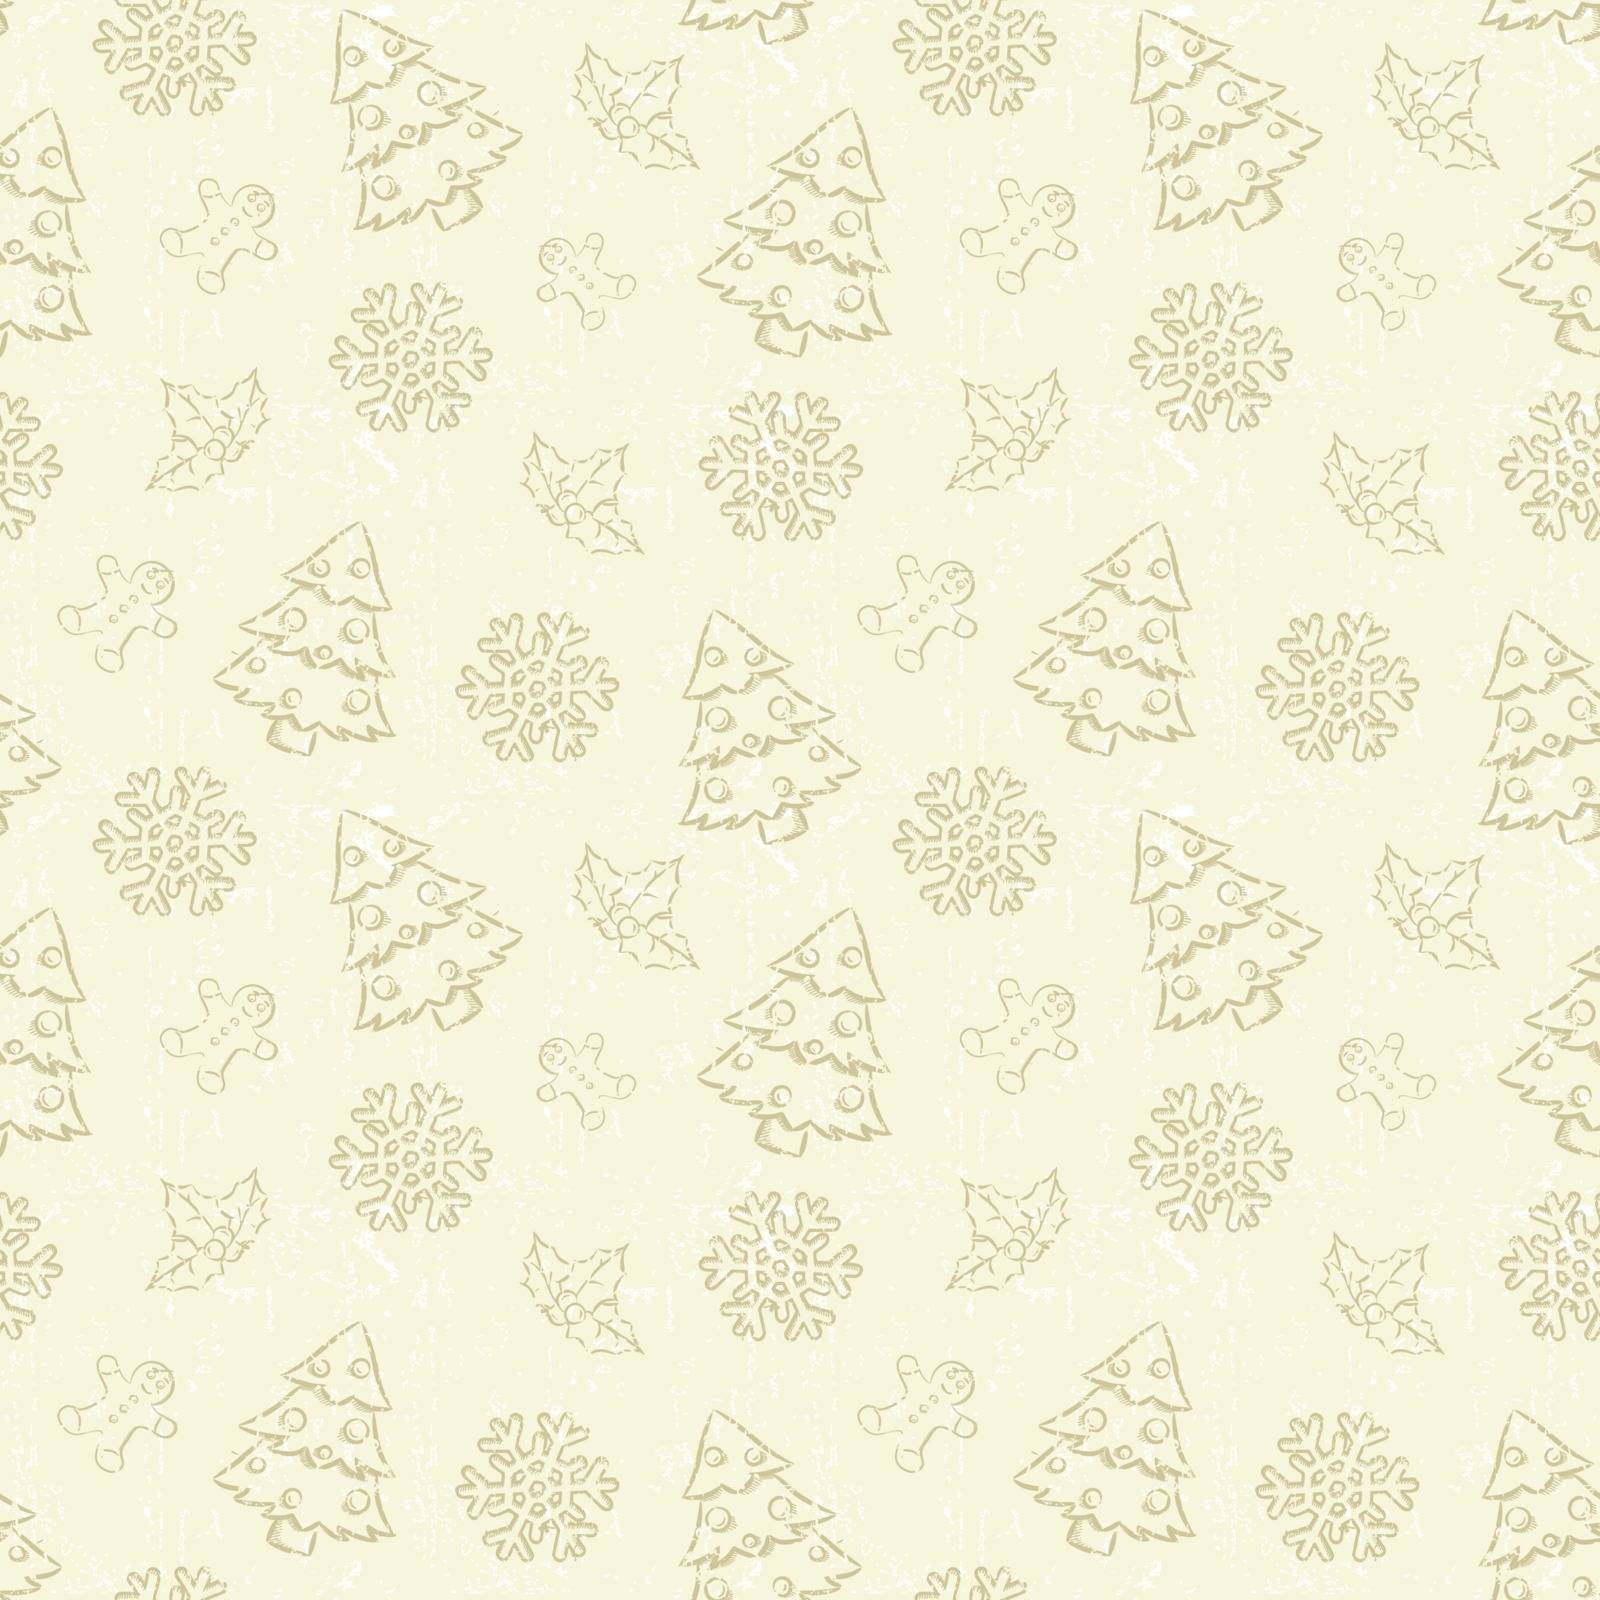 Vector illustration with classic Christmas pattern.